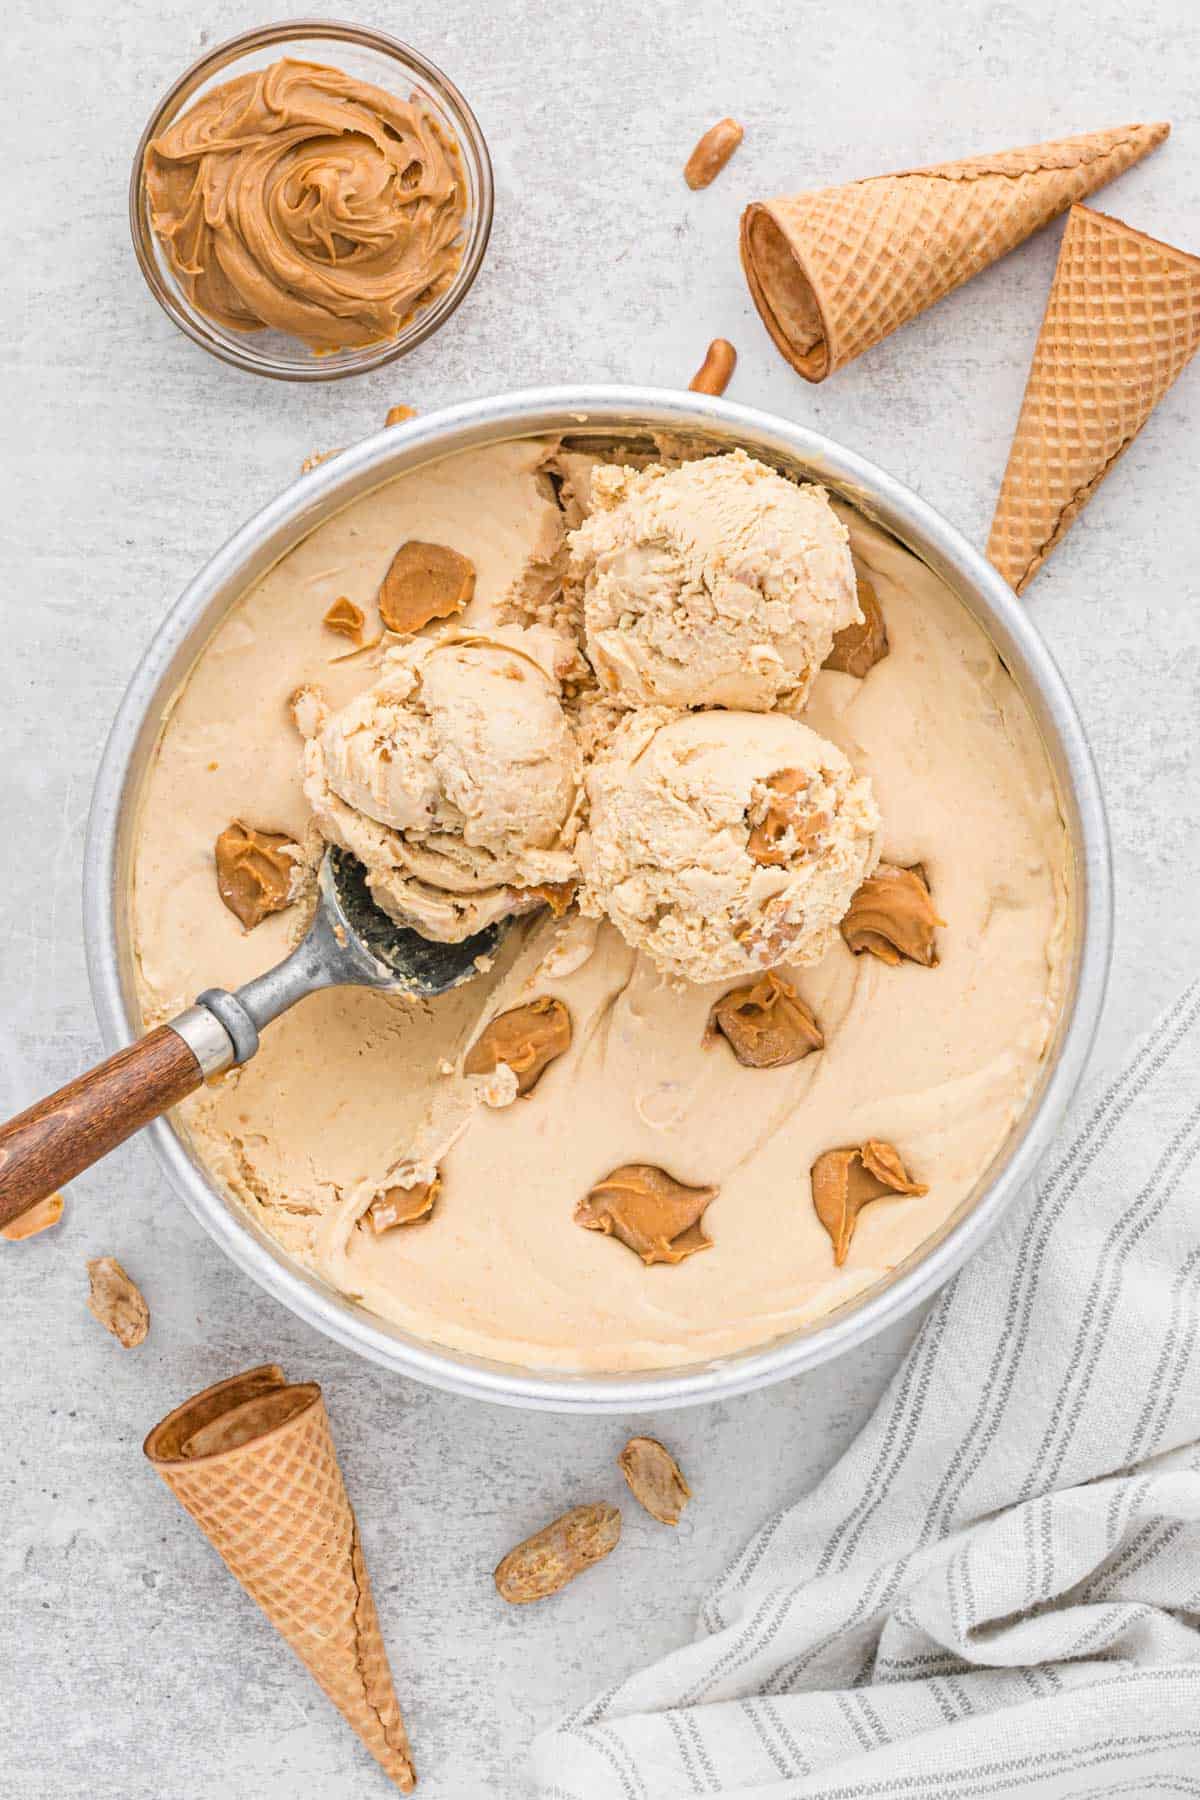 Overhead view of cake pan filled with peanut butter ice cream, surrounded by cones and a bowl of peanut butter